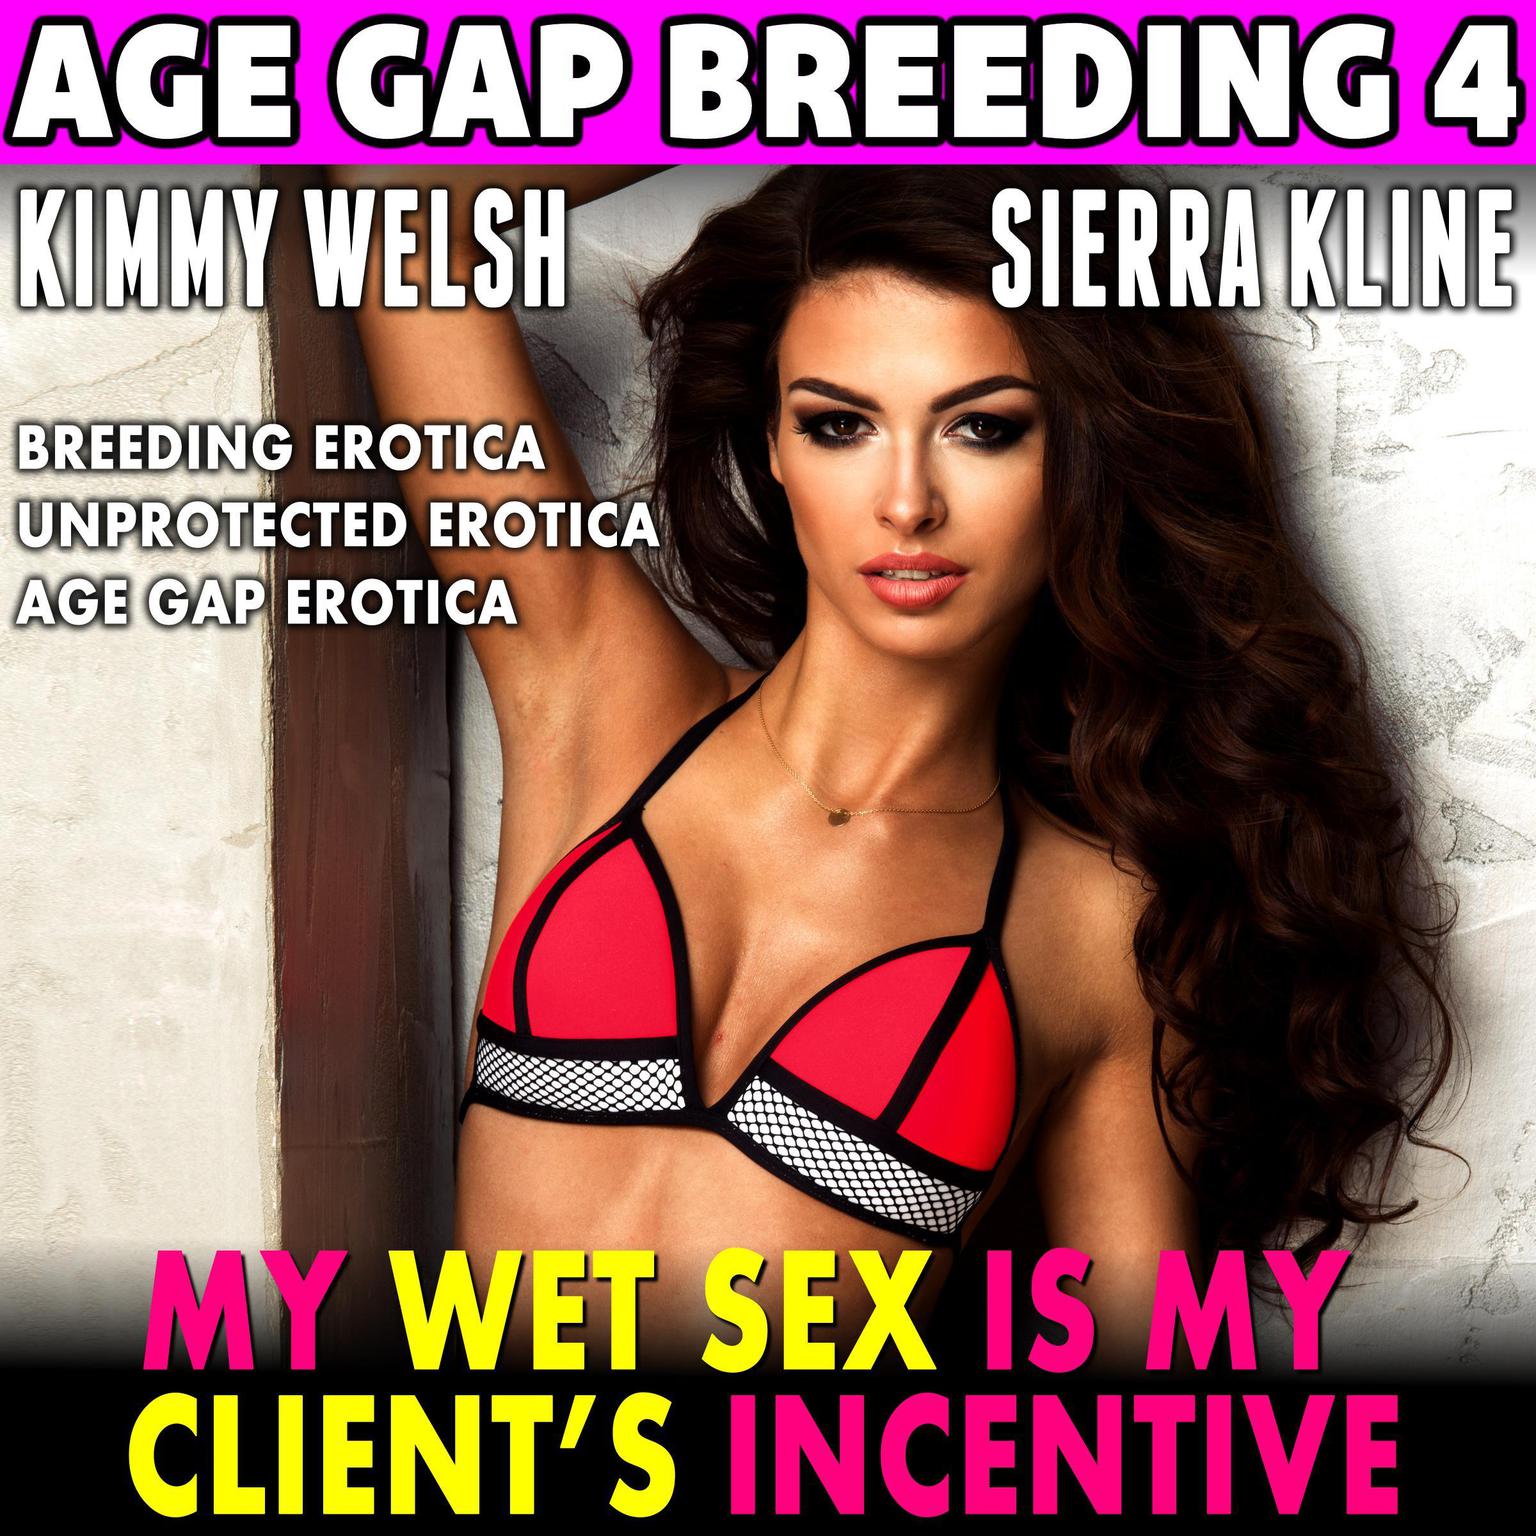 My Wet Sex Is My Client’s Incentive: Breeding Erotica Unprotected Erotica Age Gap Erotica Erotica Audiobook, by Kimmy Welsh